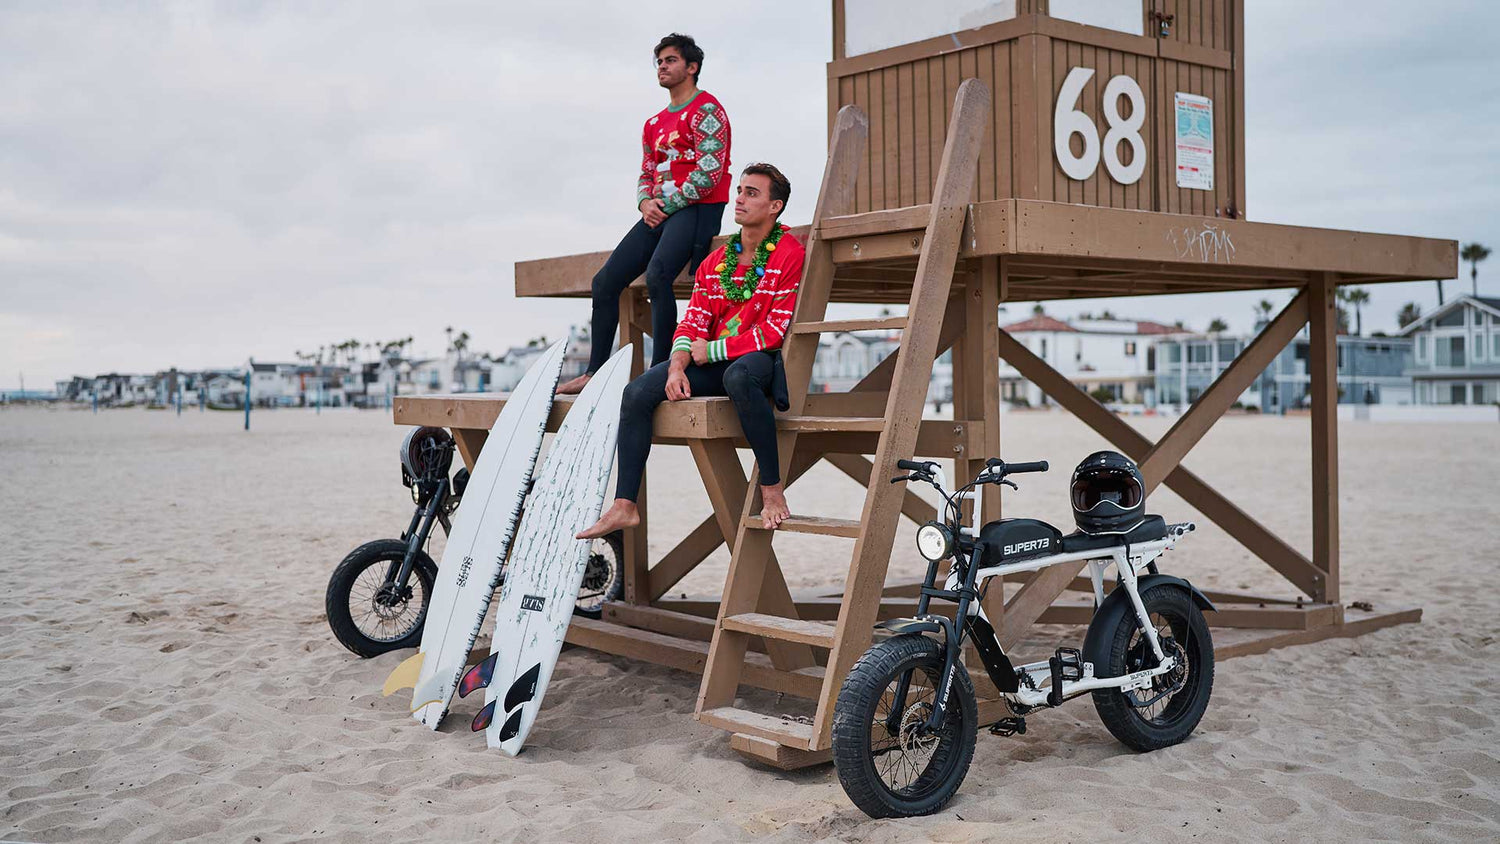 Two men sit on a lifeguard tower in holiday sweaters surrounded by two SUPER73 electric bikes and surfboards.